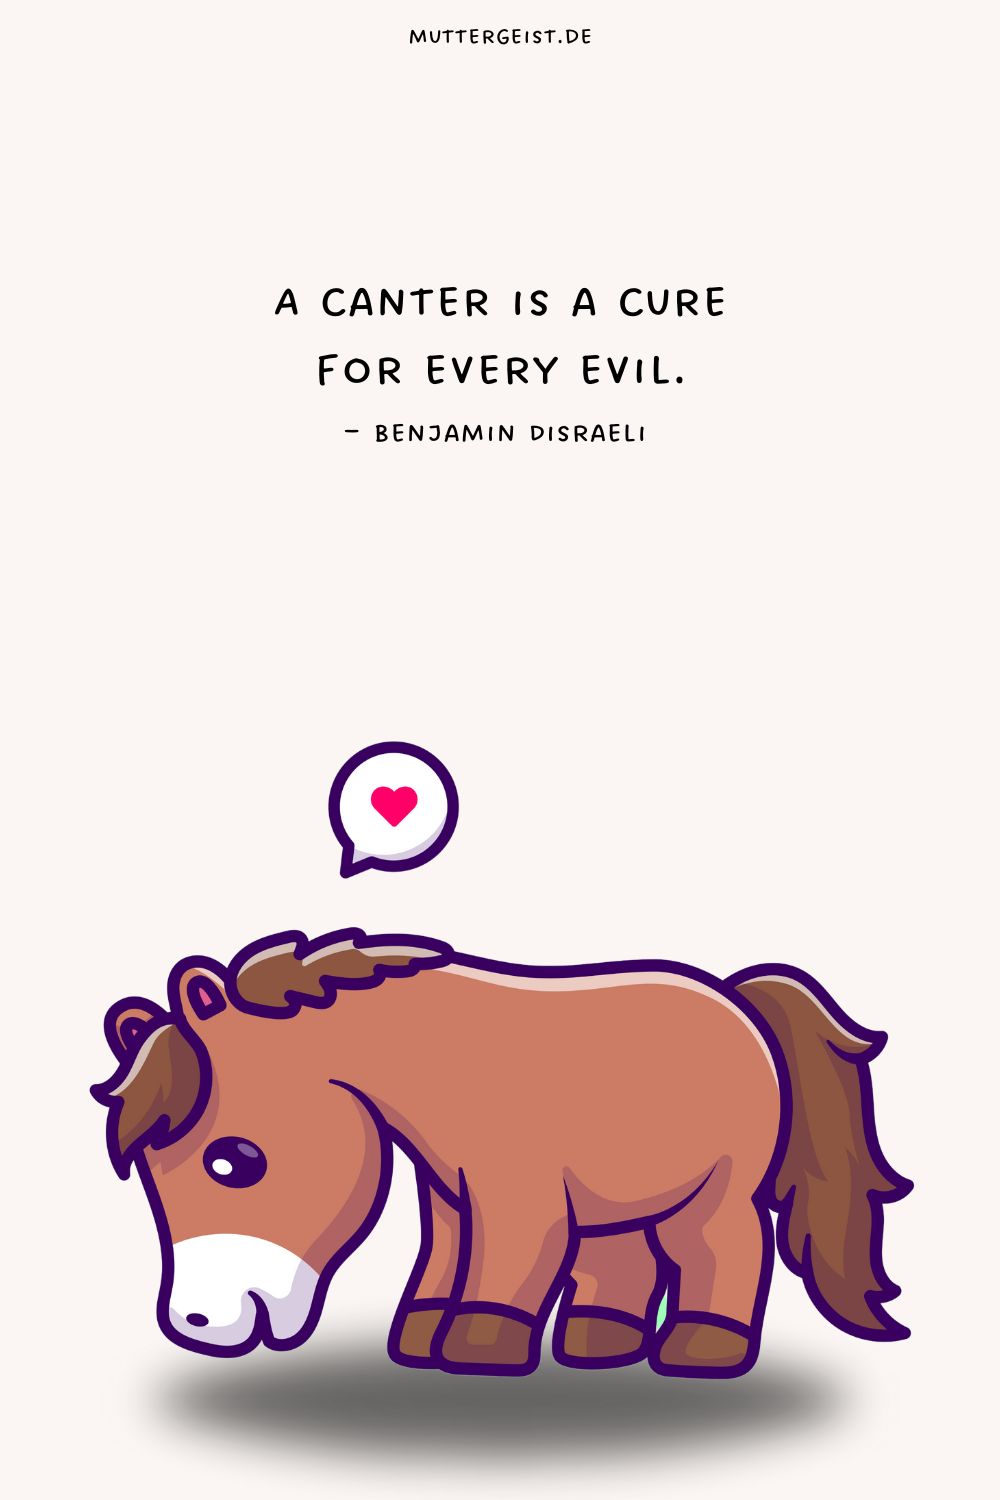  A canter is a cure for every evil